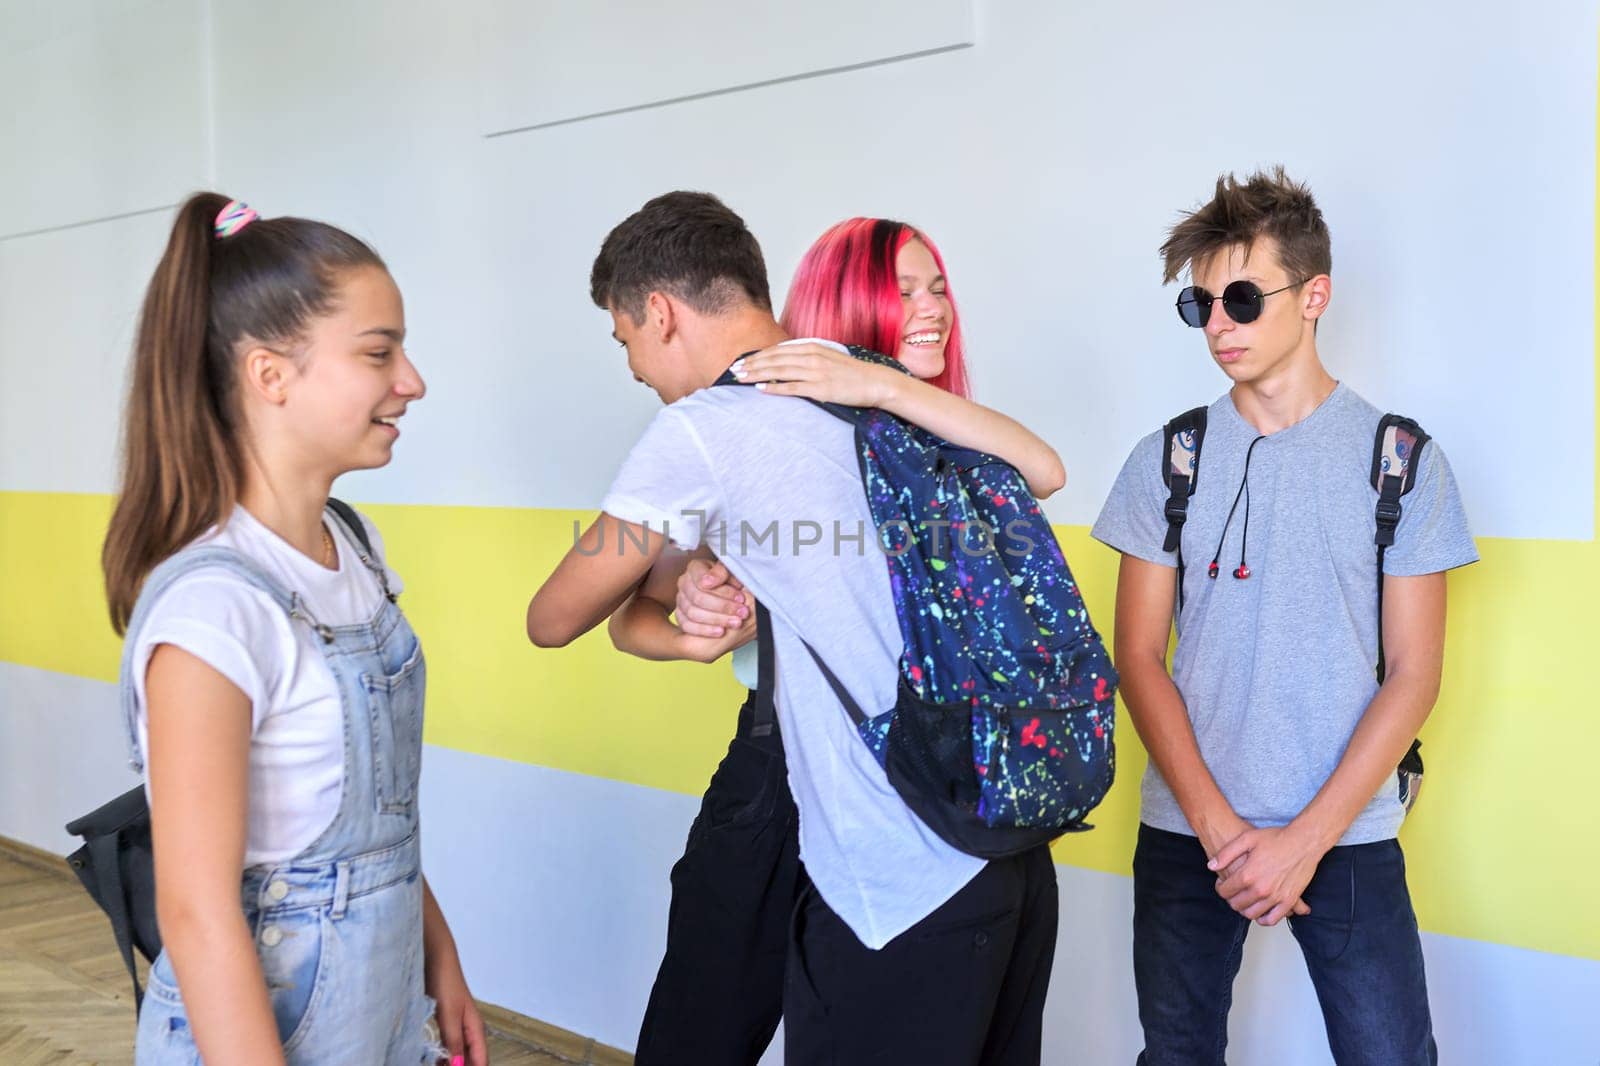 Meeting of teenage students at school, greeting and hugging. Friendship, school, college, teenagers concept